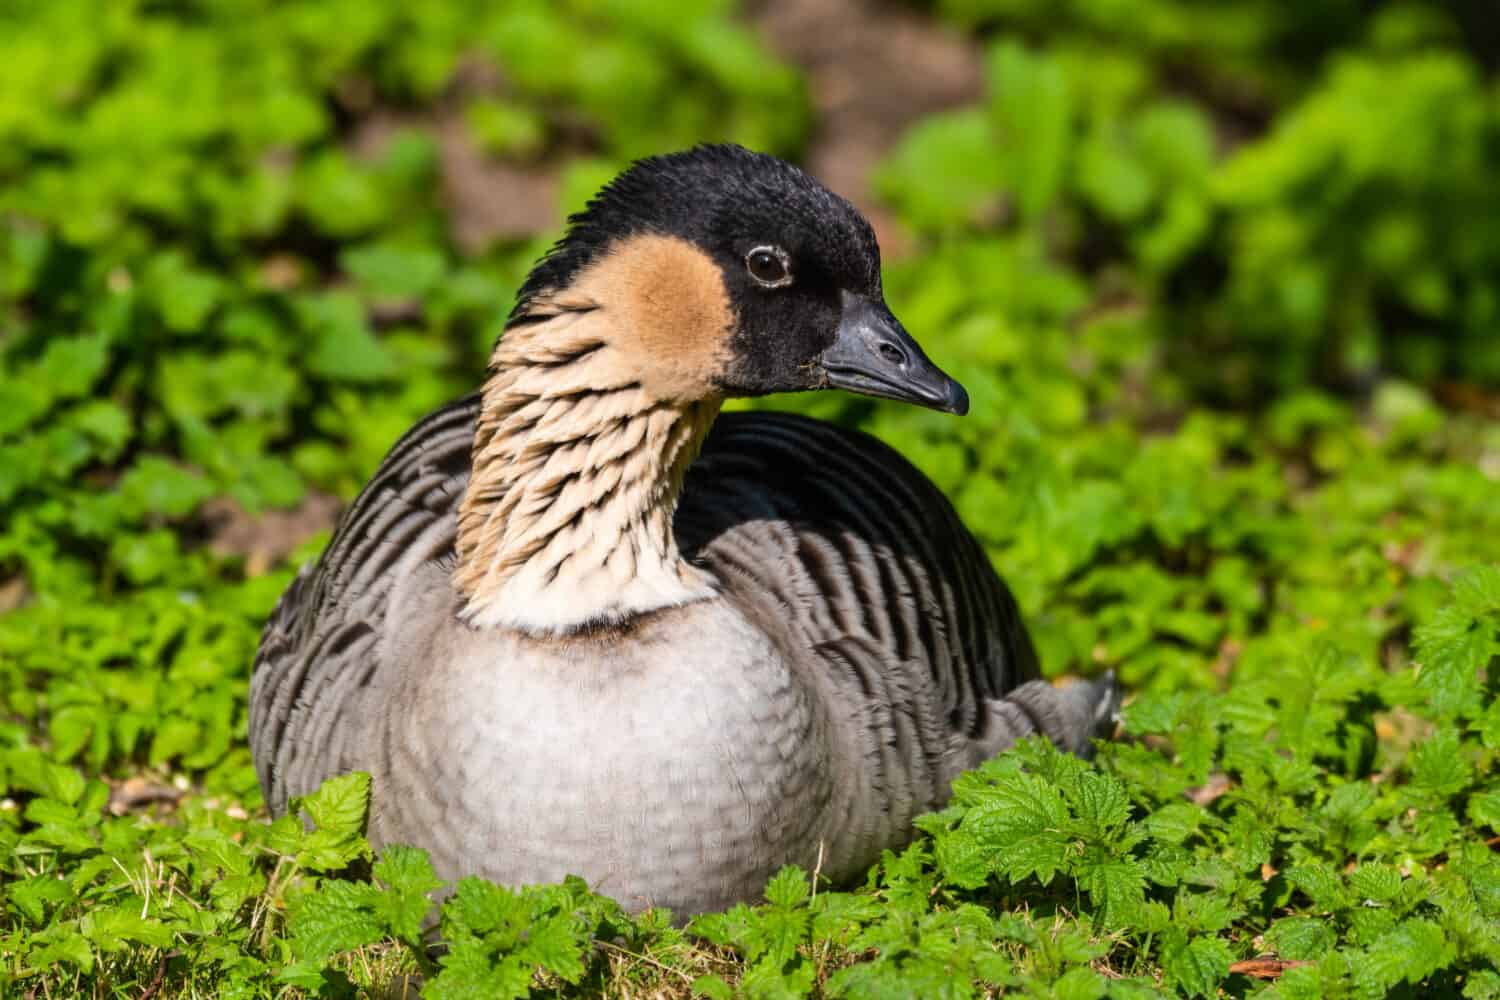 Nene Goose Laying on Leaves and Grass